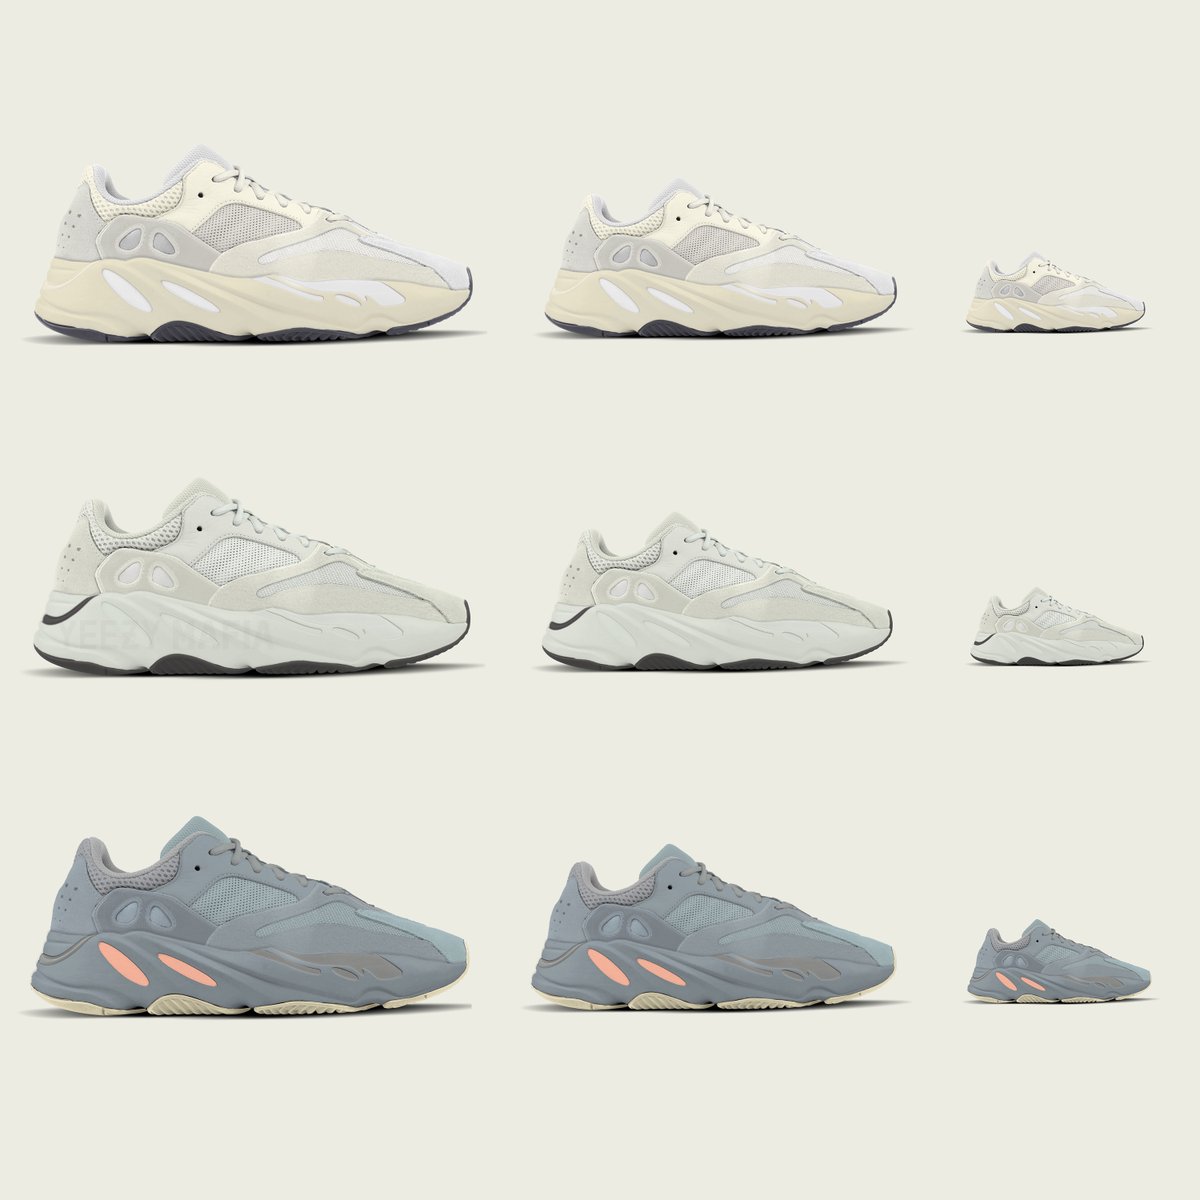 yeezy 700 sizing for women